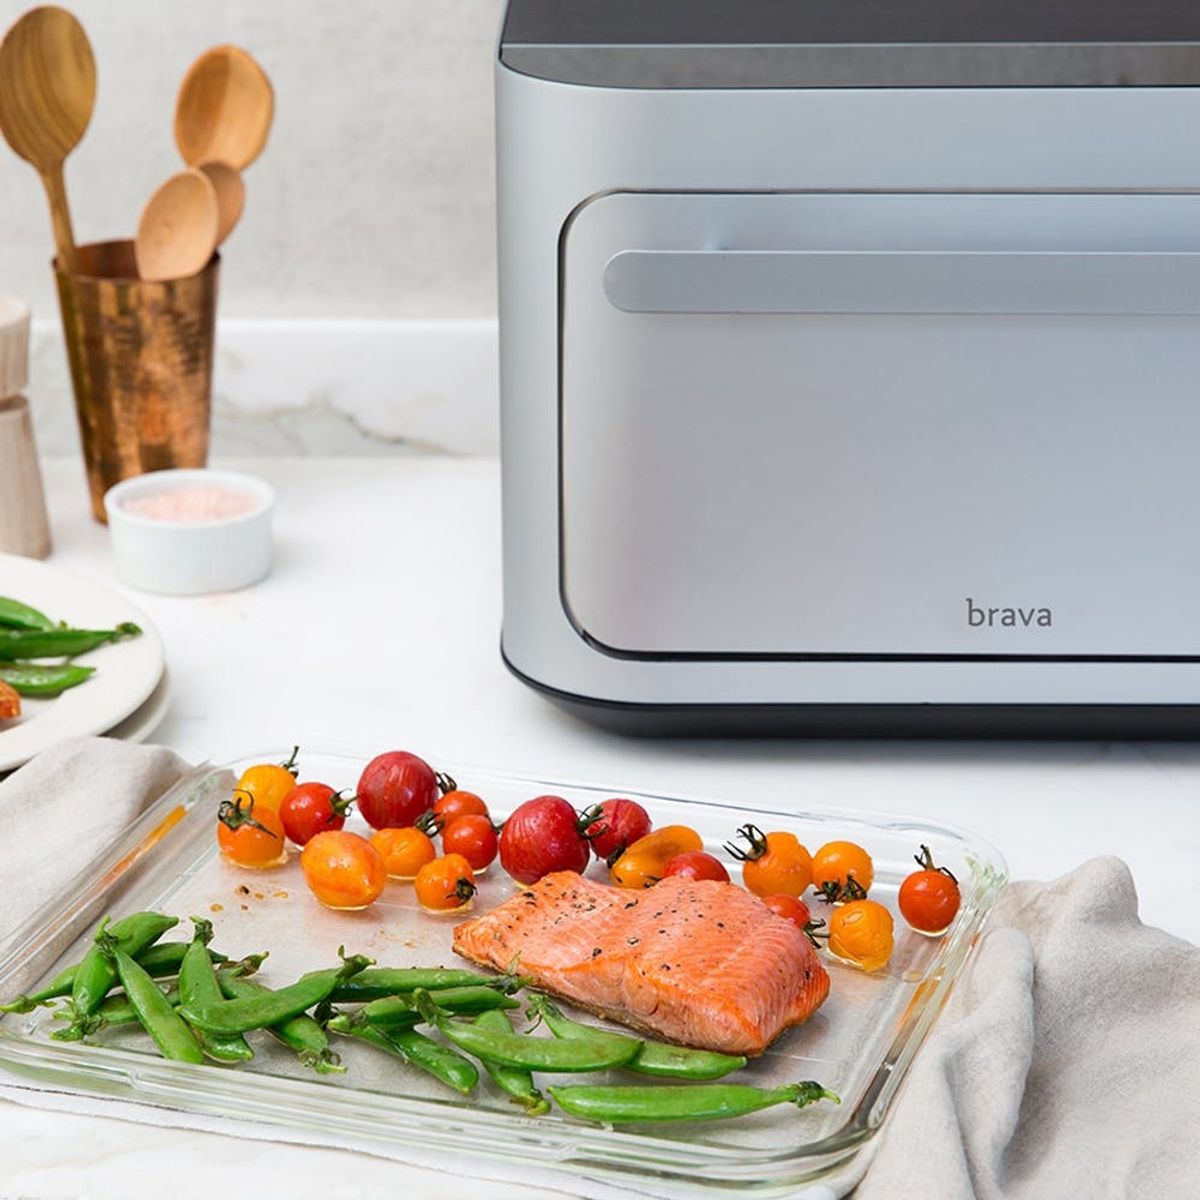 This Smart Oven Takes the Guesswork and Stress Out of Home Cooking